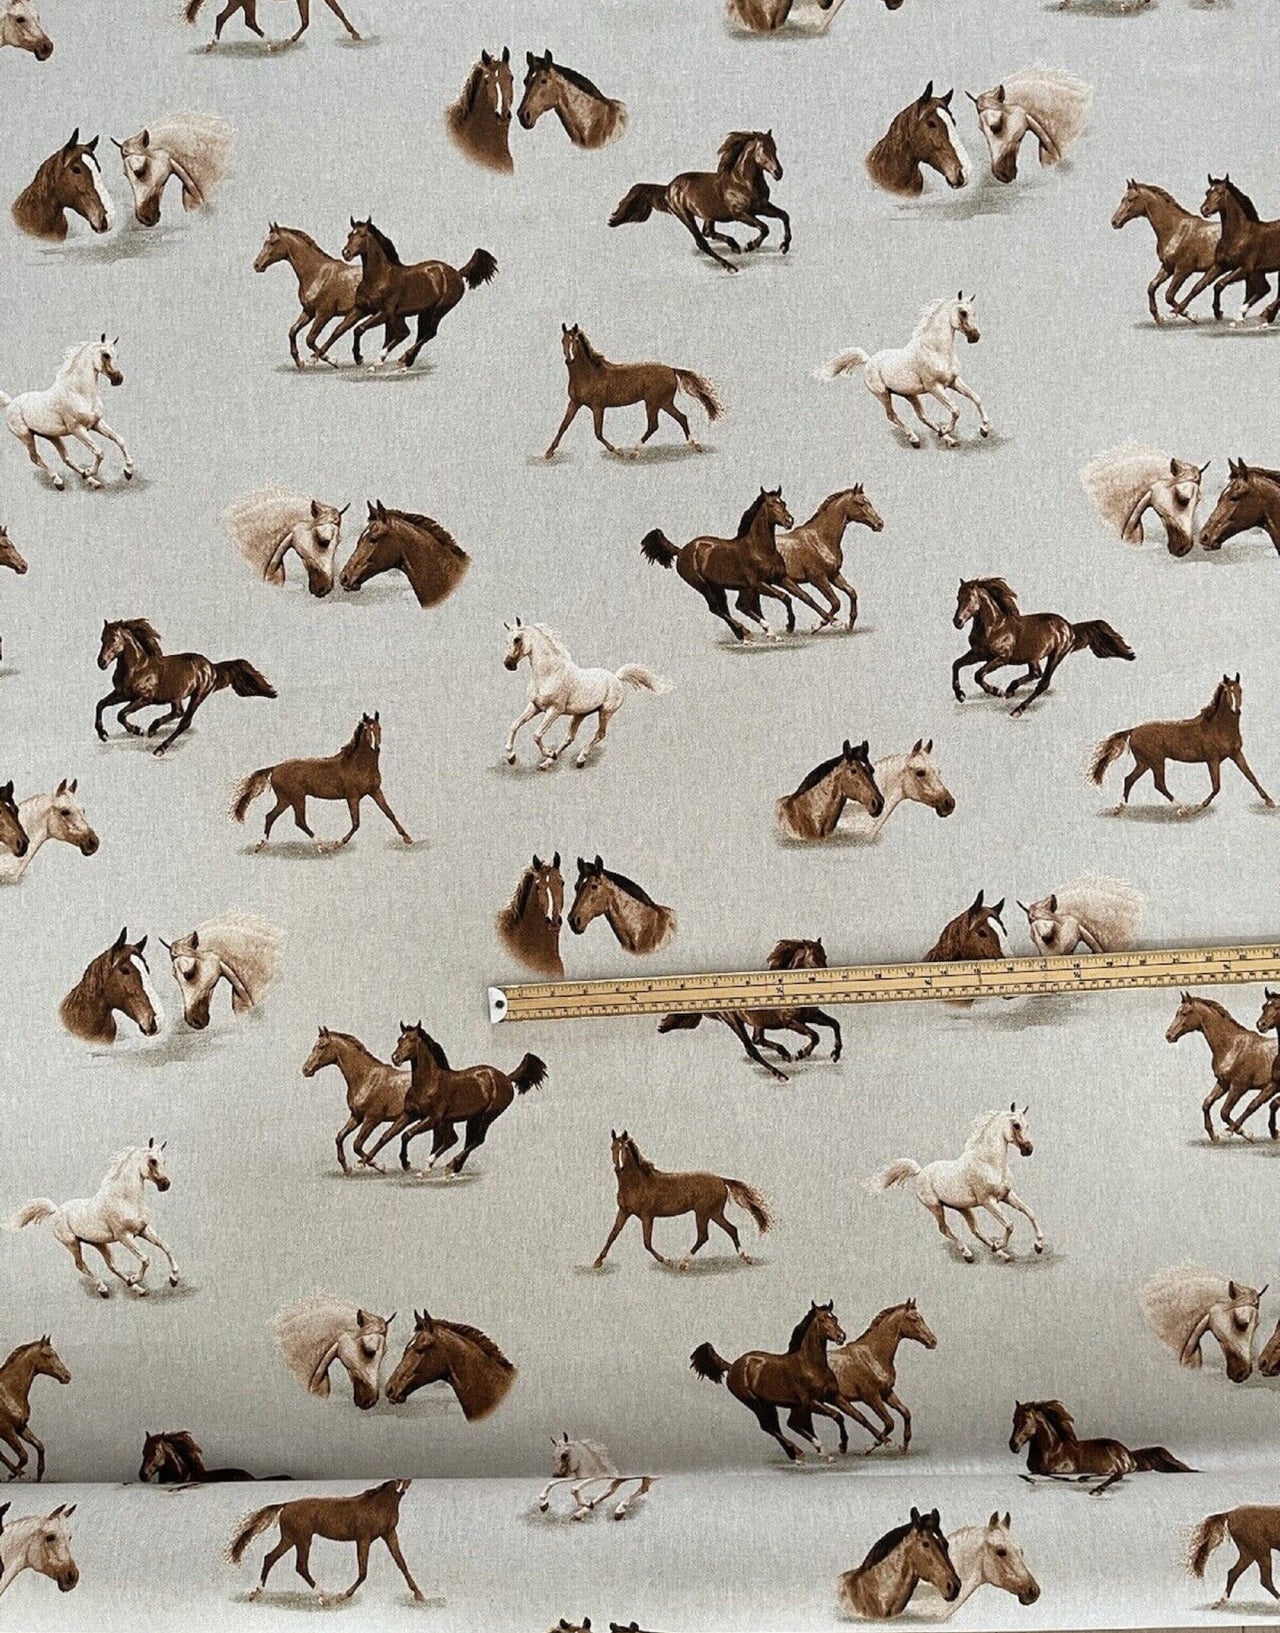 Queens Horses Printed Cotton Fabric By Meter linen Look